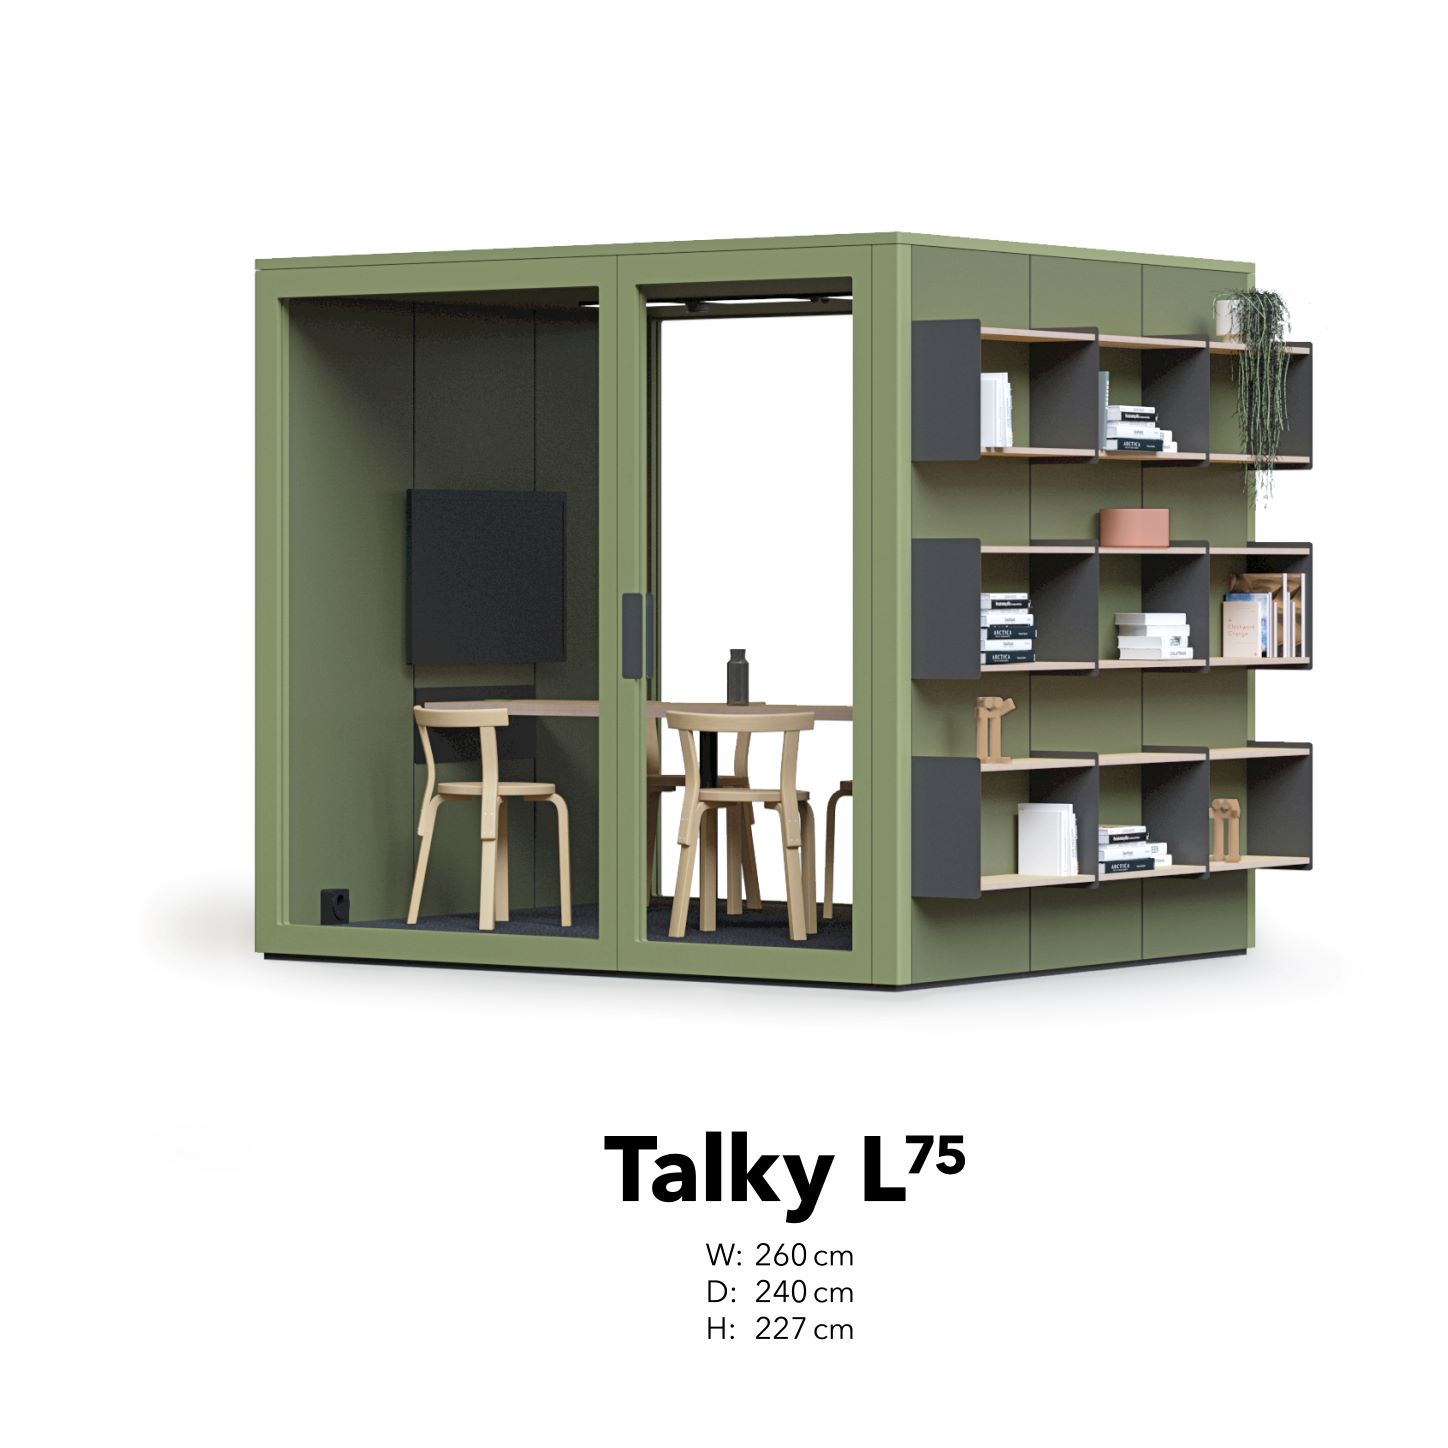 Afbeelding: Talky and Erich Keller AG